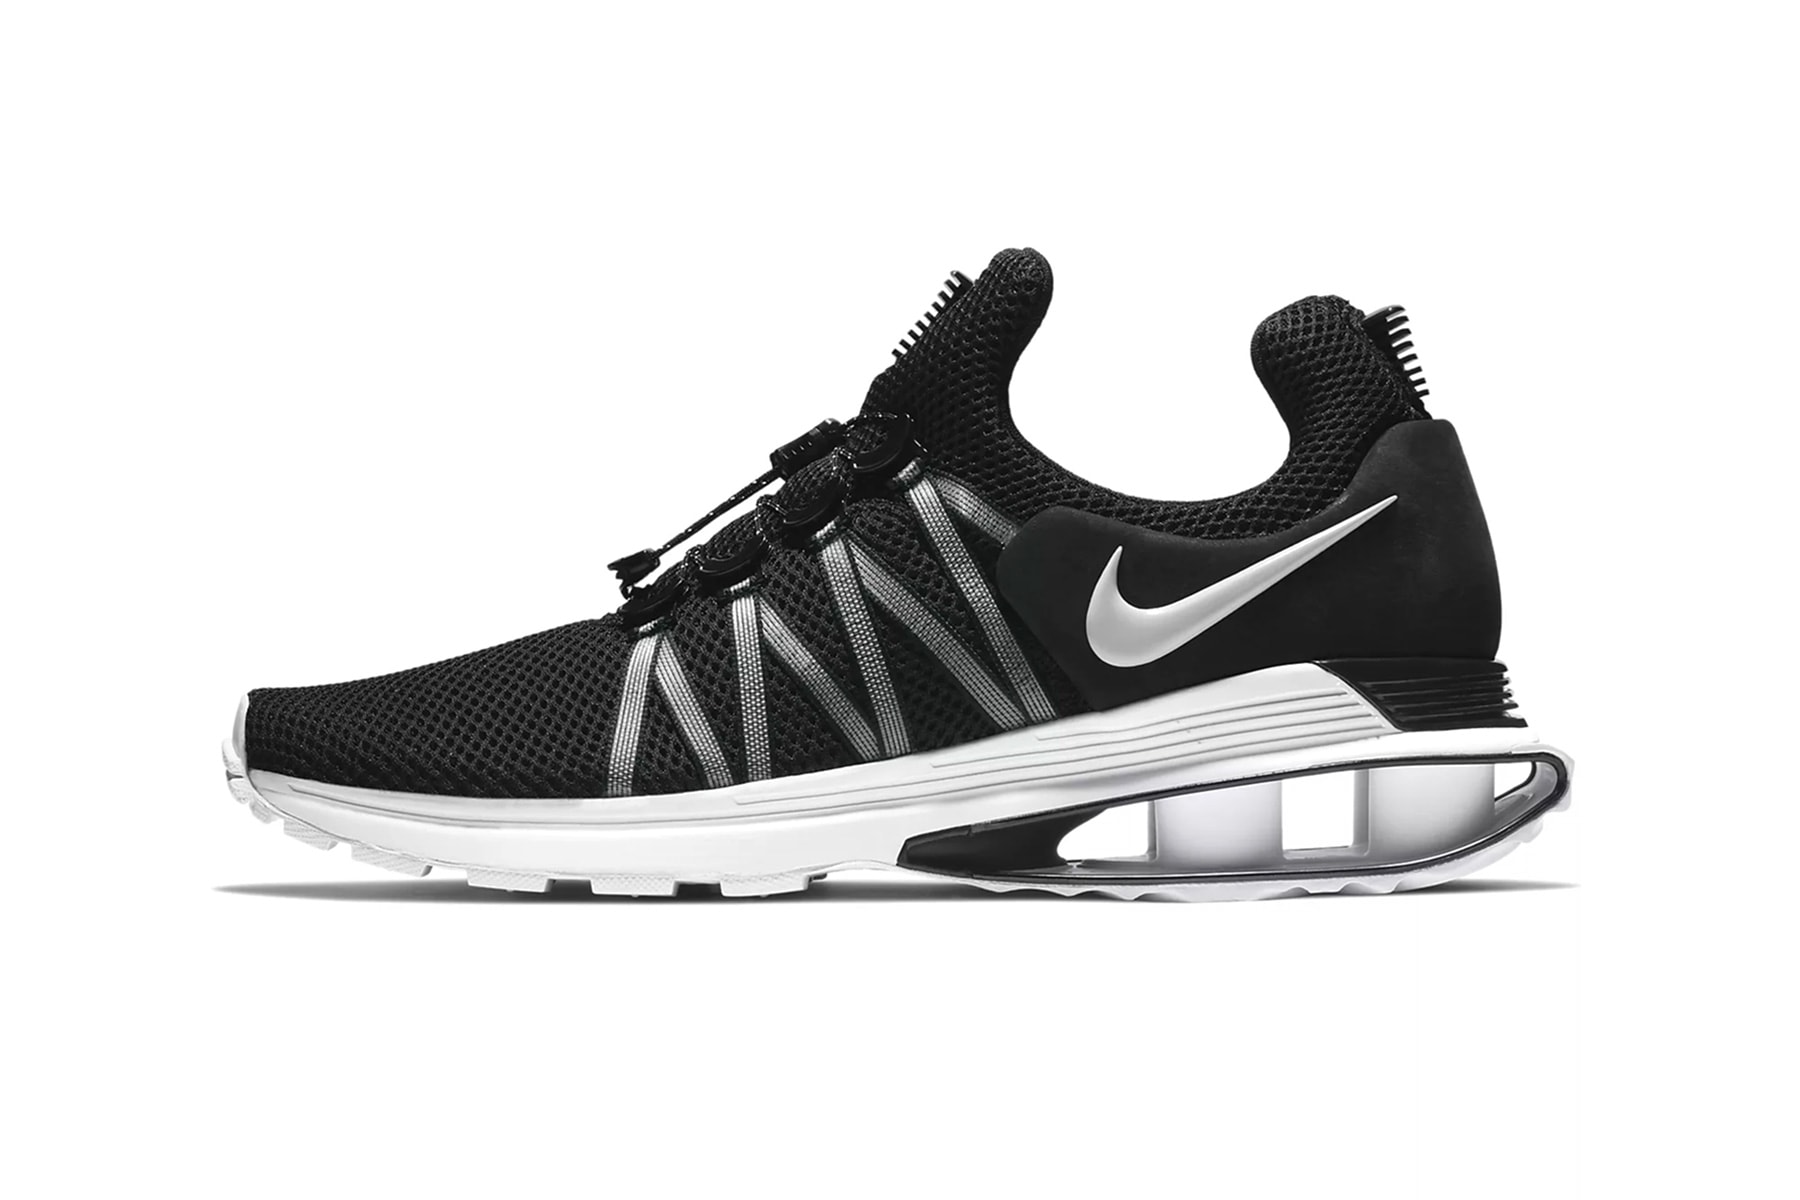 Nike Shox Gravity New Colorways Release date summer 2018 sneaker all black all white